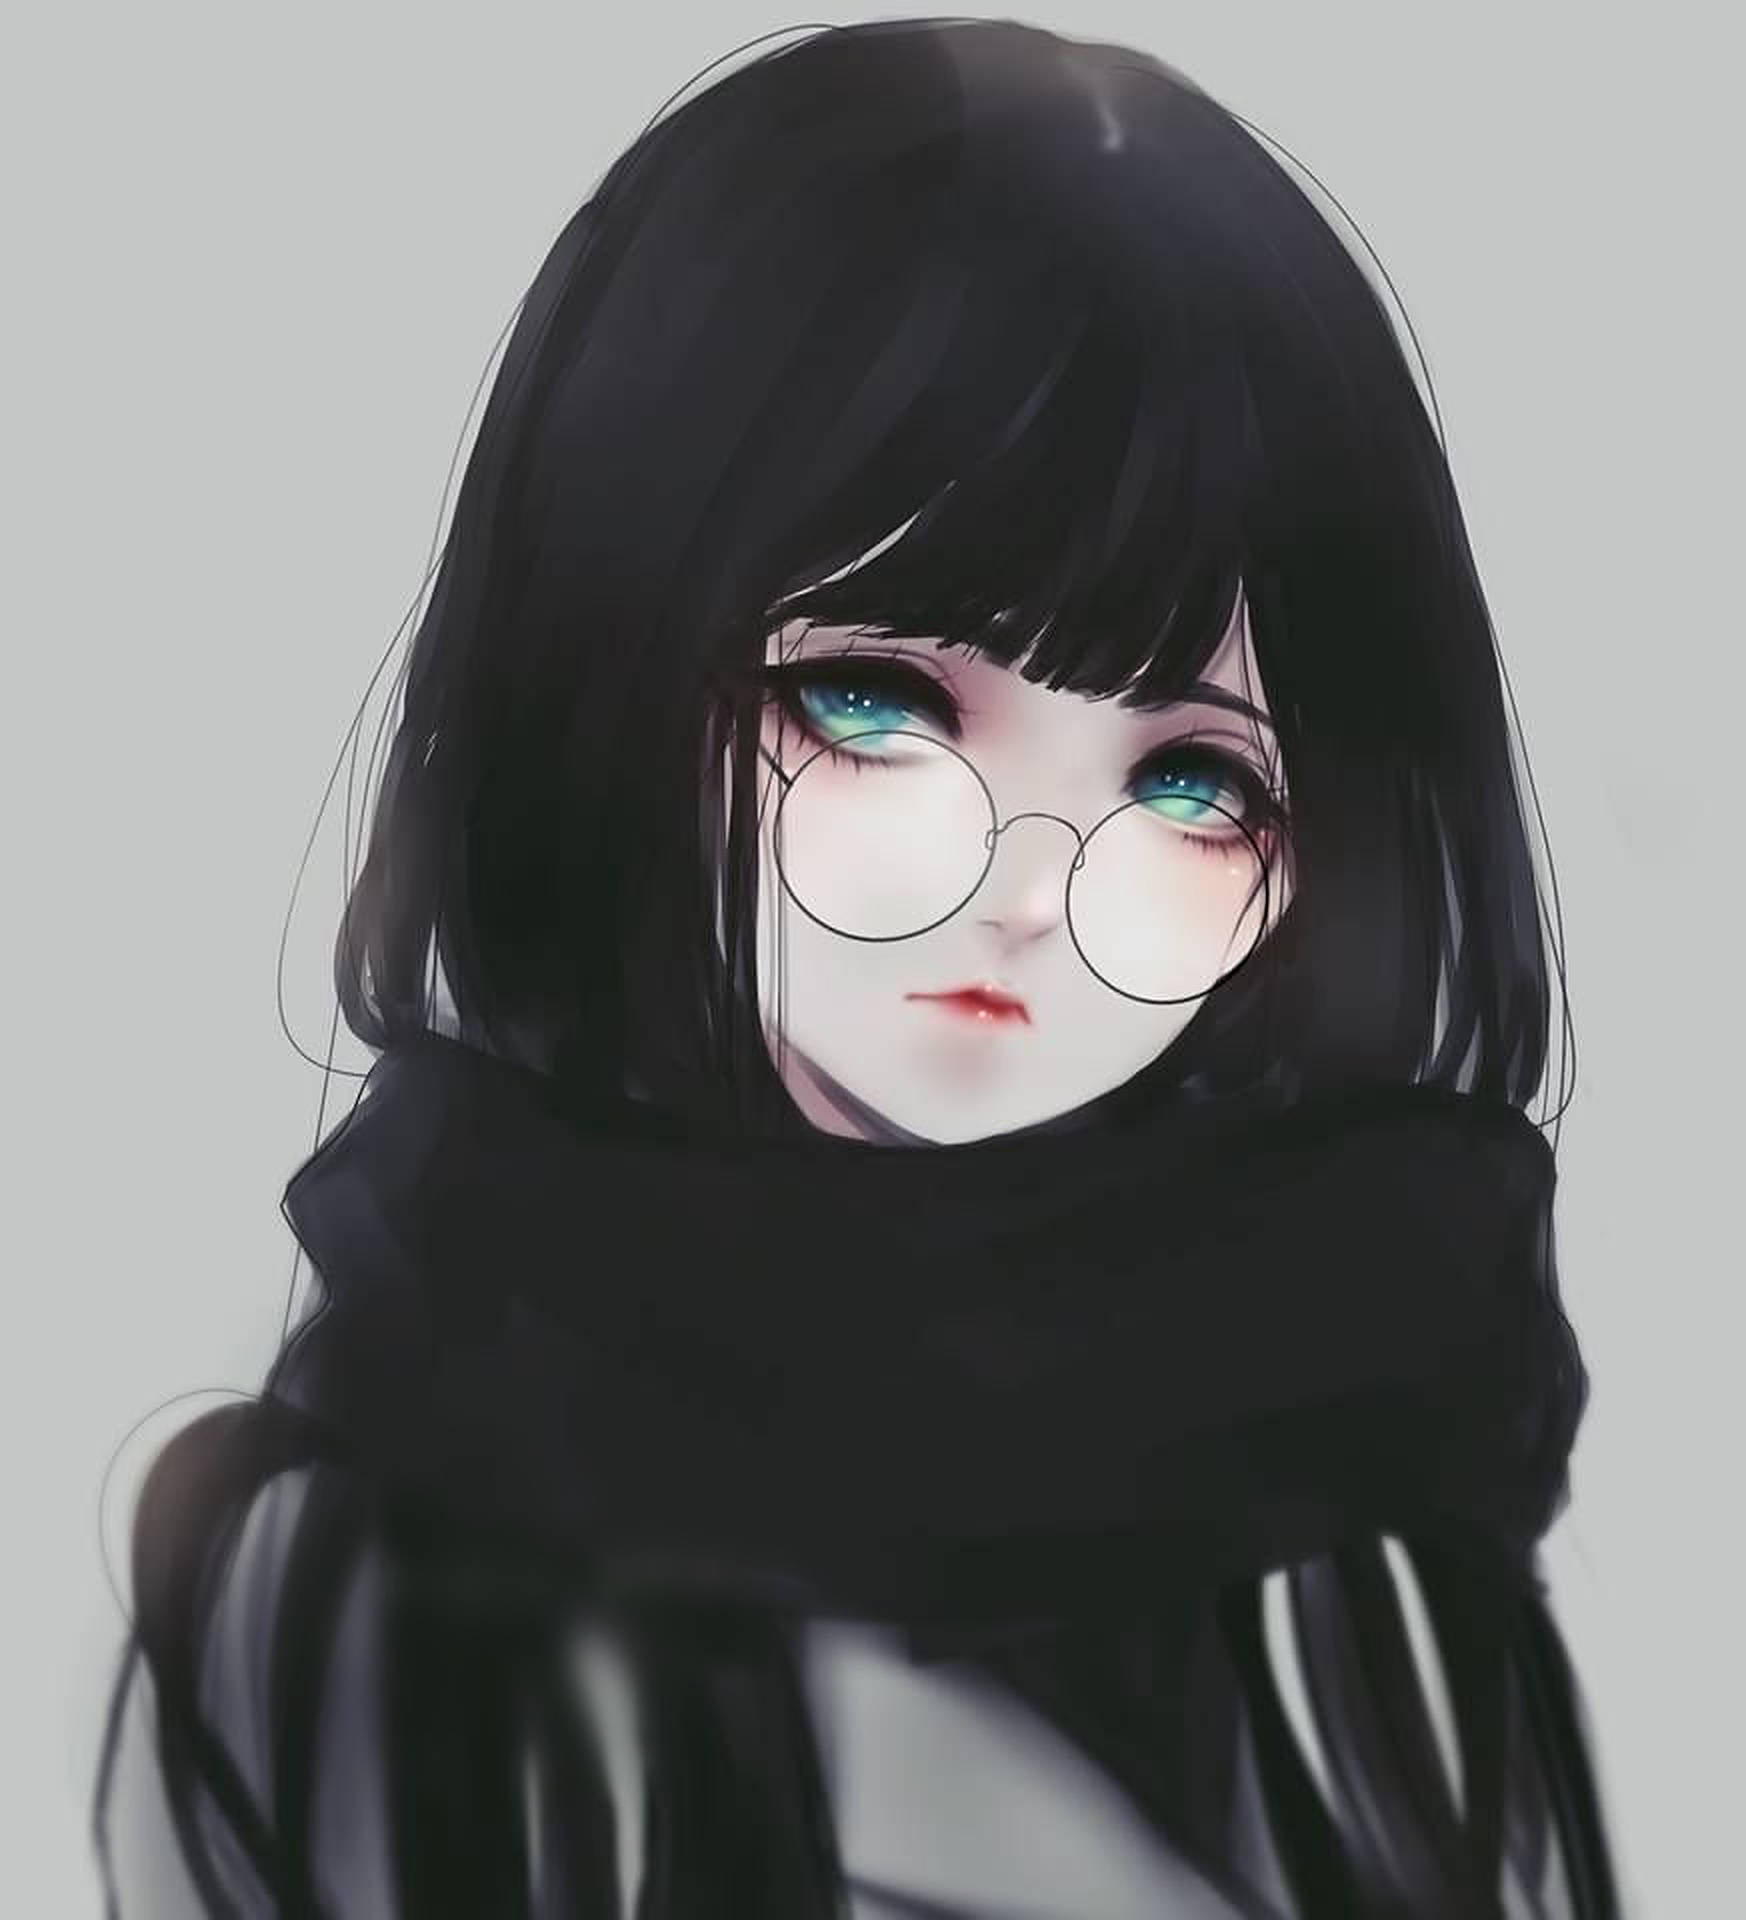 Download Anime Girl With Glasses Emo Pfp Wallpaper 